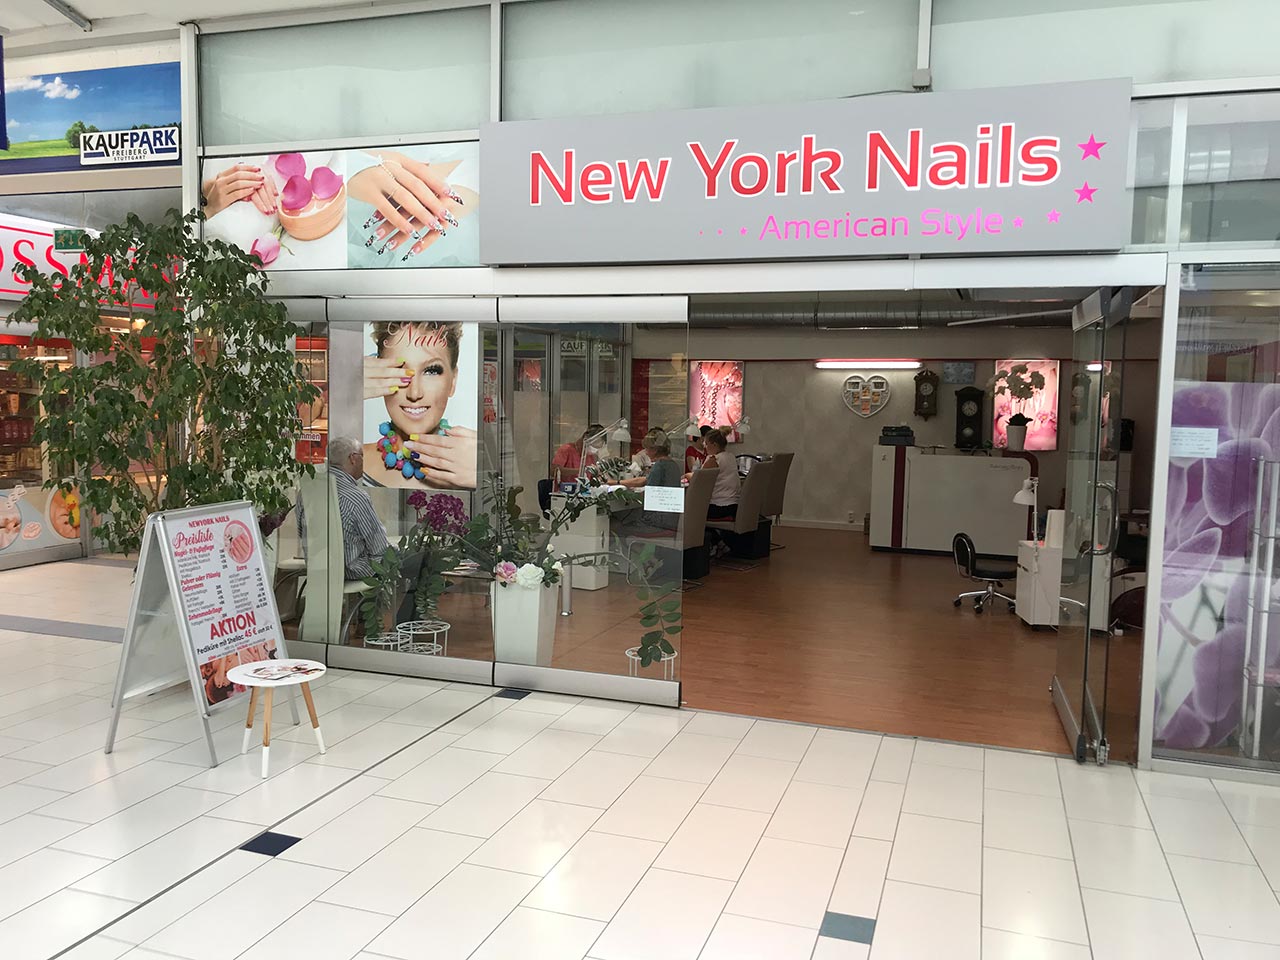 NEW YORK NAILS - American Style